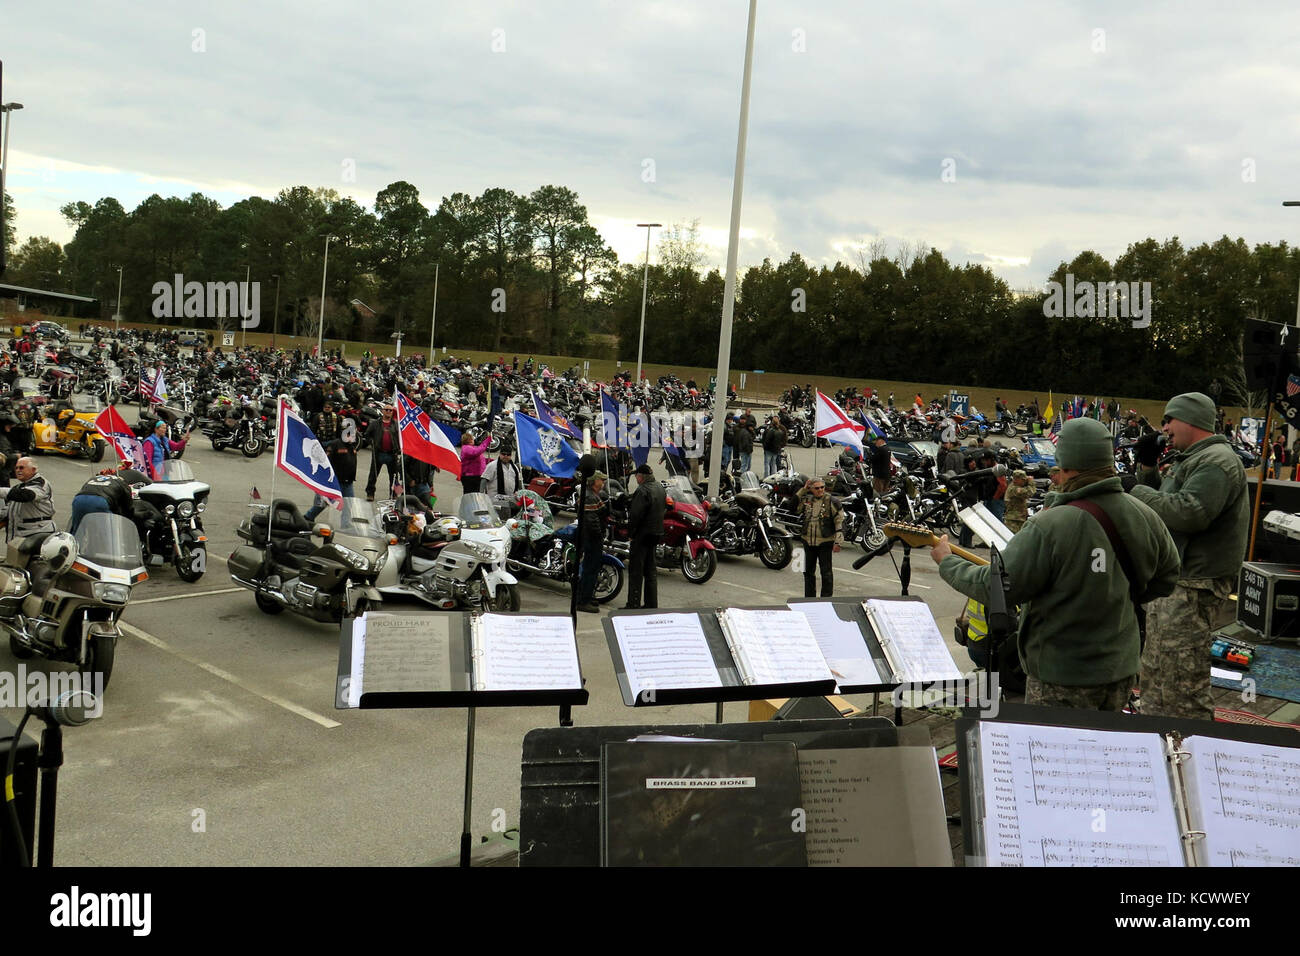 Veterans at the Dorn Veterans Administration were brought gifts and donations by hundreds of motorcycle riders during the 16th annual Vet's Christmas Ride held Dec. 11, 2016 in Columbia, South Carolina. The event included participation by the 246th Army Band and U.S. Army Maj. Gen. Robert E. Livingston, Jr., the adjutant general for South Carolina who was one of the parade's leaders. (U.S. Army National Guard photo by Lt. Col. Cindi King) Stock Photo